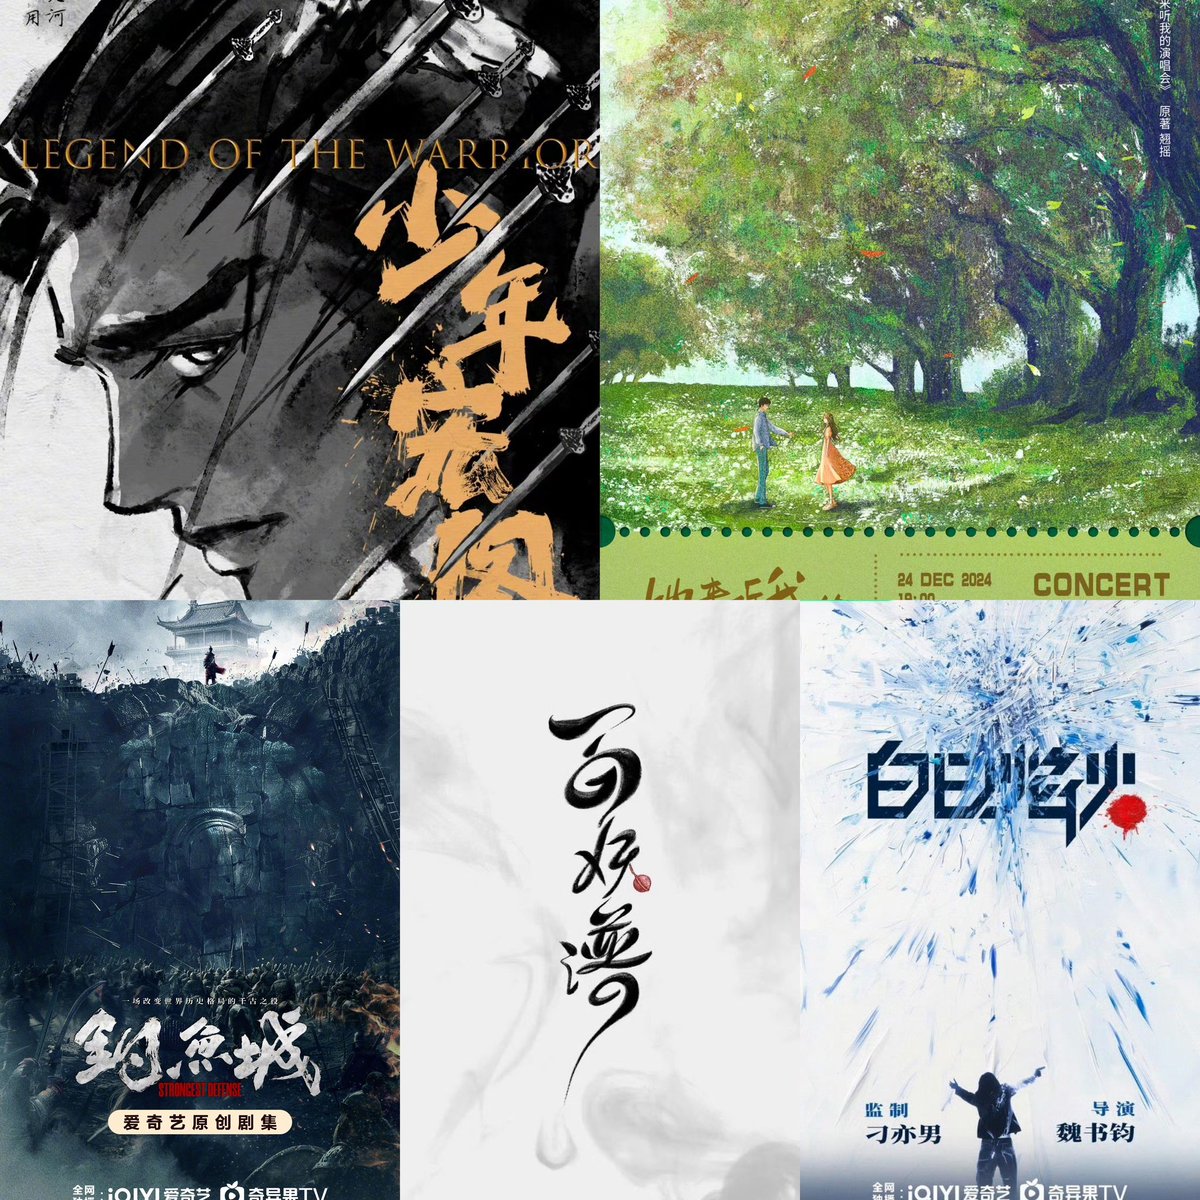 More iQIYI upcoming drama adaptations: 

Wuxia drama #LegendoftheWarrior (#少年宏图)
#SheComesToMyLivingShow (She Came To My Concert adaptation)
Live action of #FairiesAlbums
Spinoff of movie #BlackCoalThinIce, Wei Shujun as director
#StrongestDefense (exec prod Zheng Xiaolong)